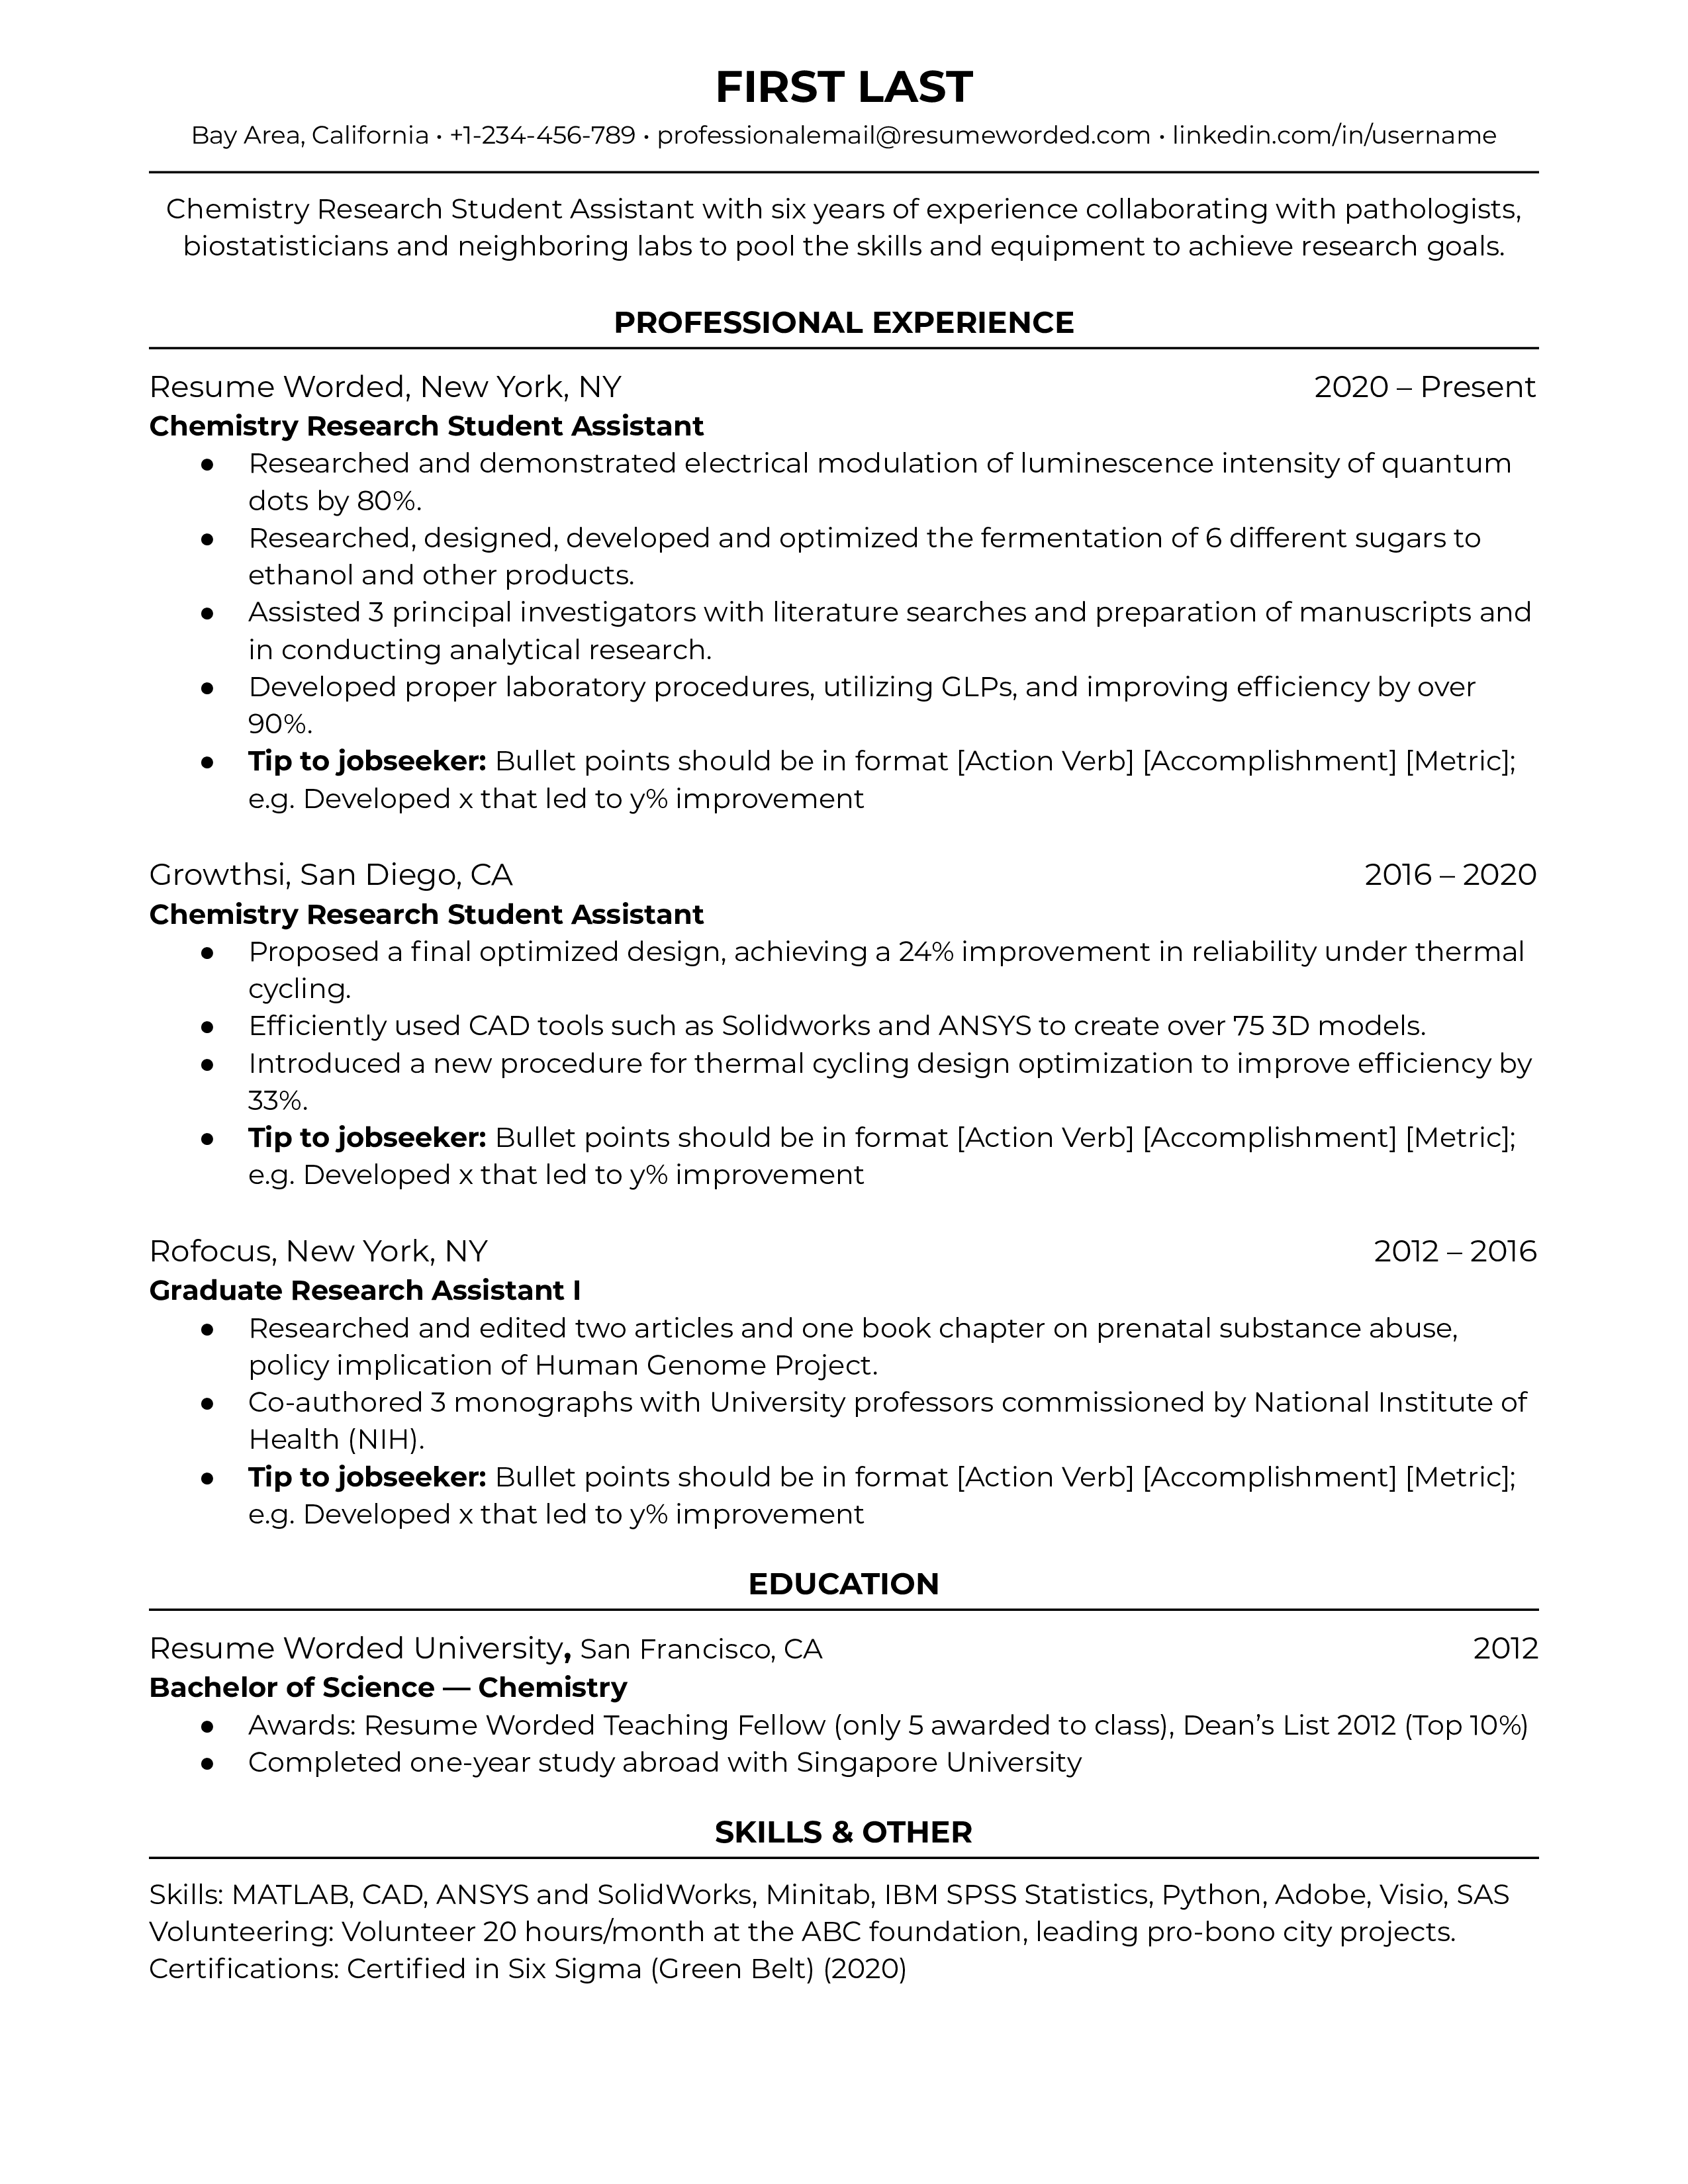 Chemistry Research Student Resume Sample